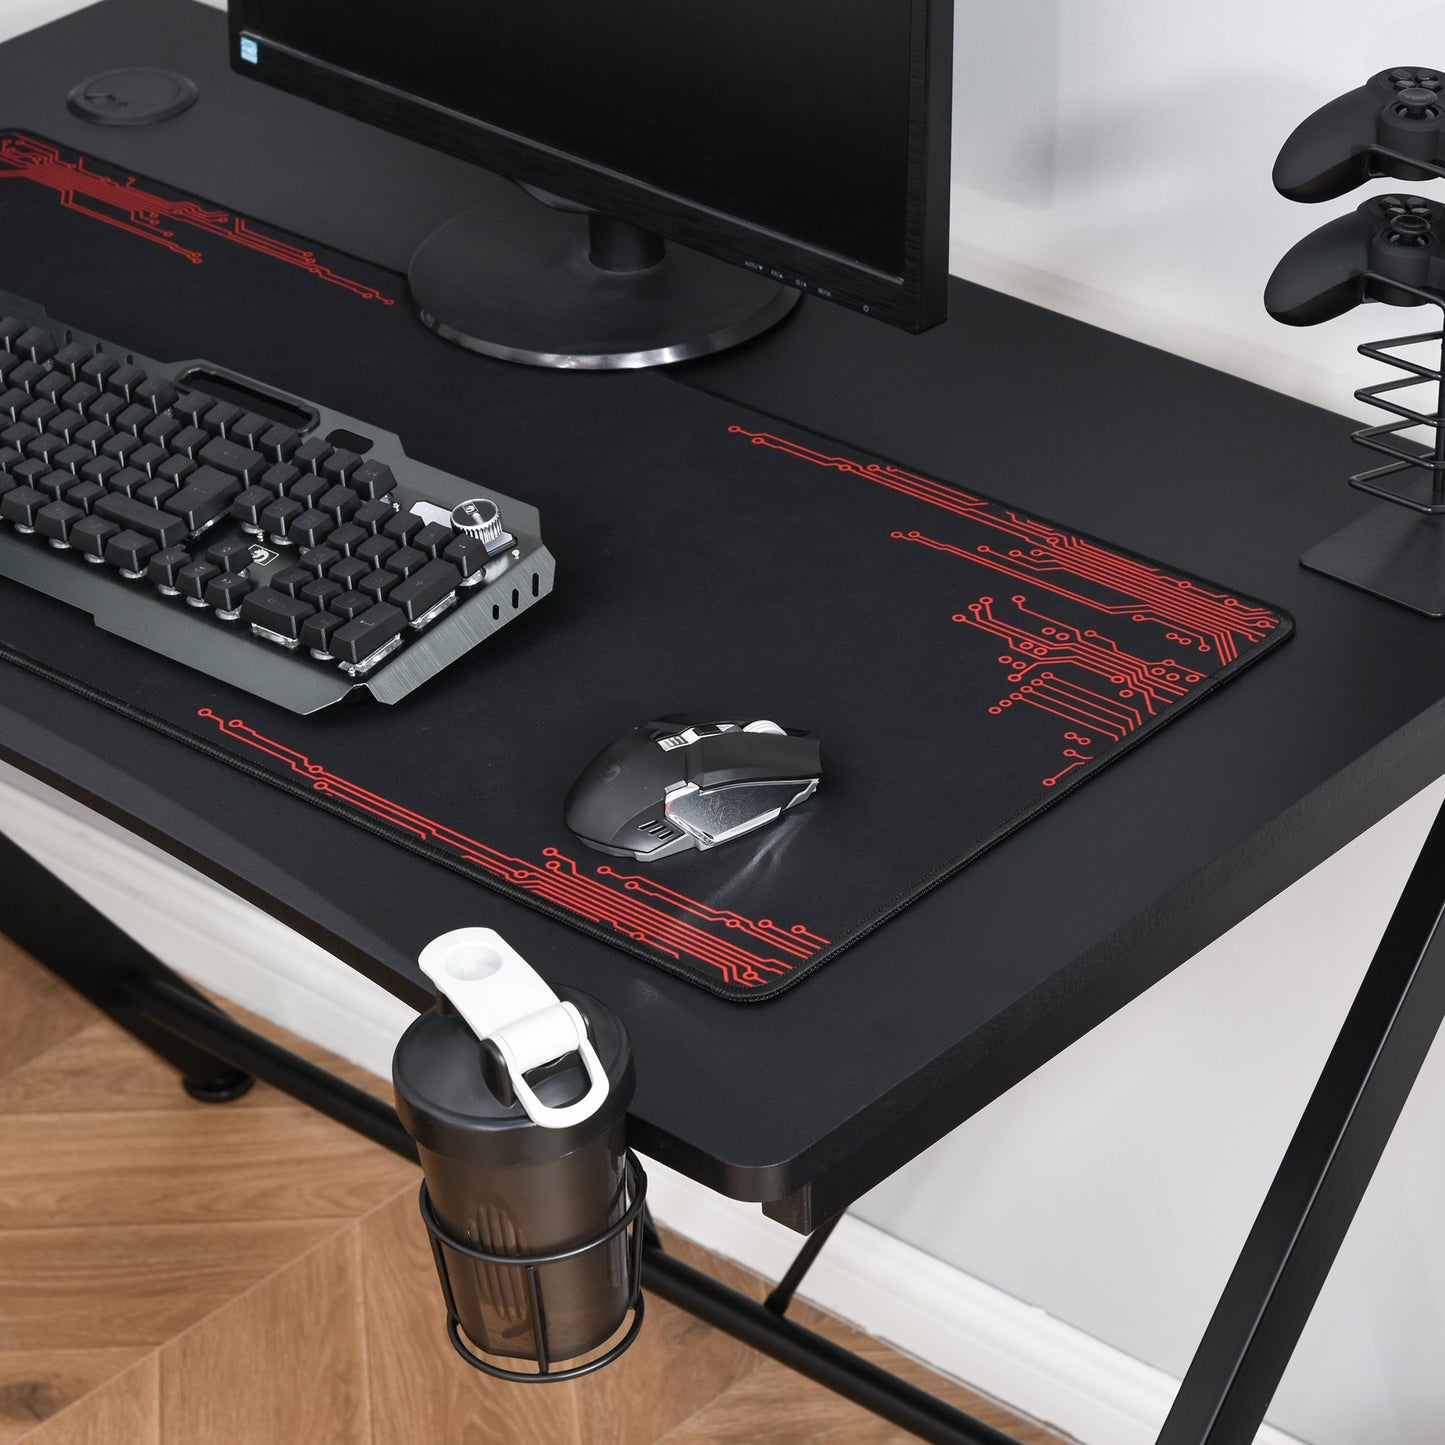 HOMCOM Gaming Desk Computer Table Metal Frame w/ Cup Holder, Headphone Hook, Cable Hole